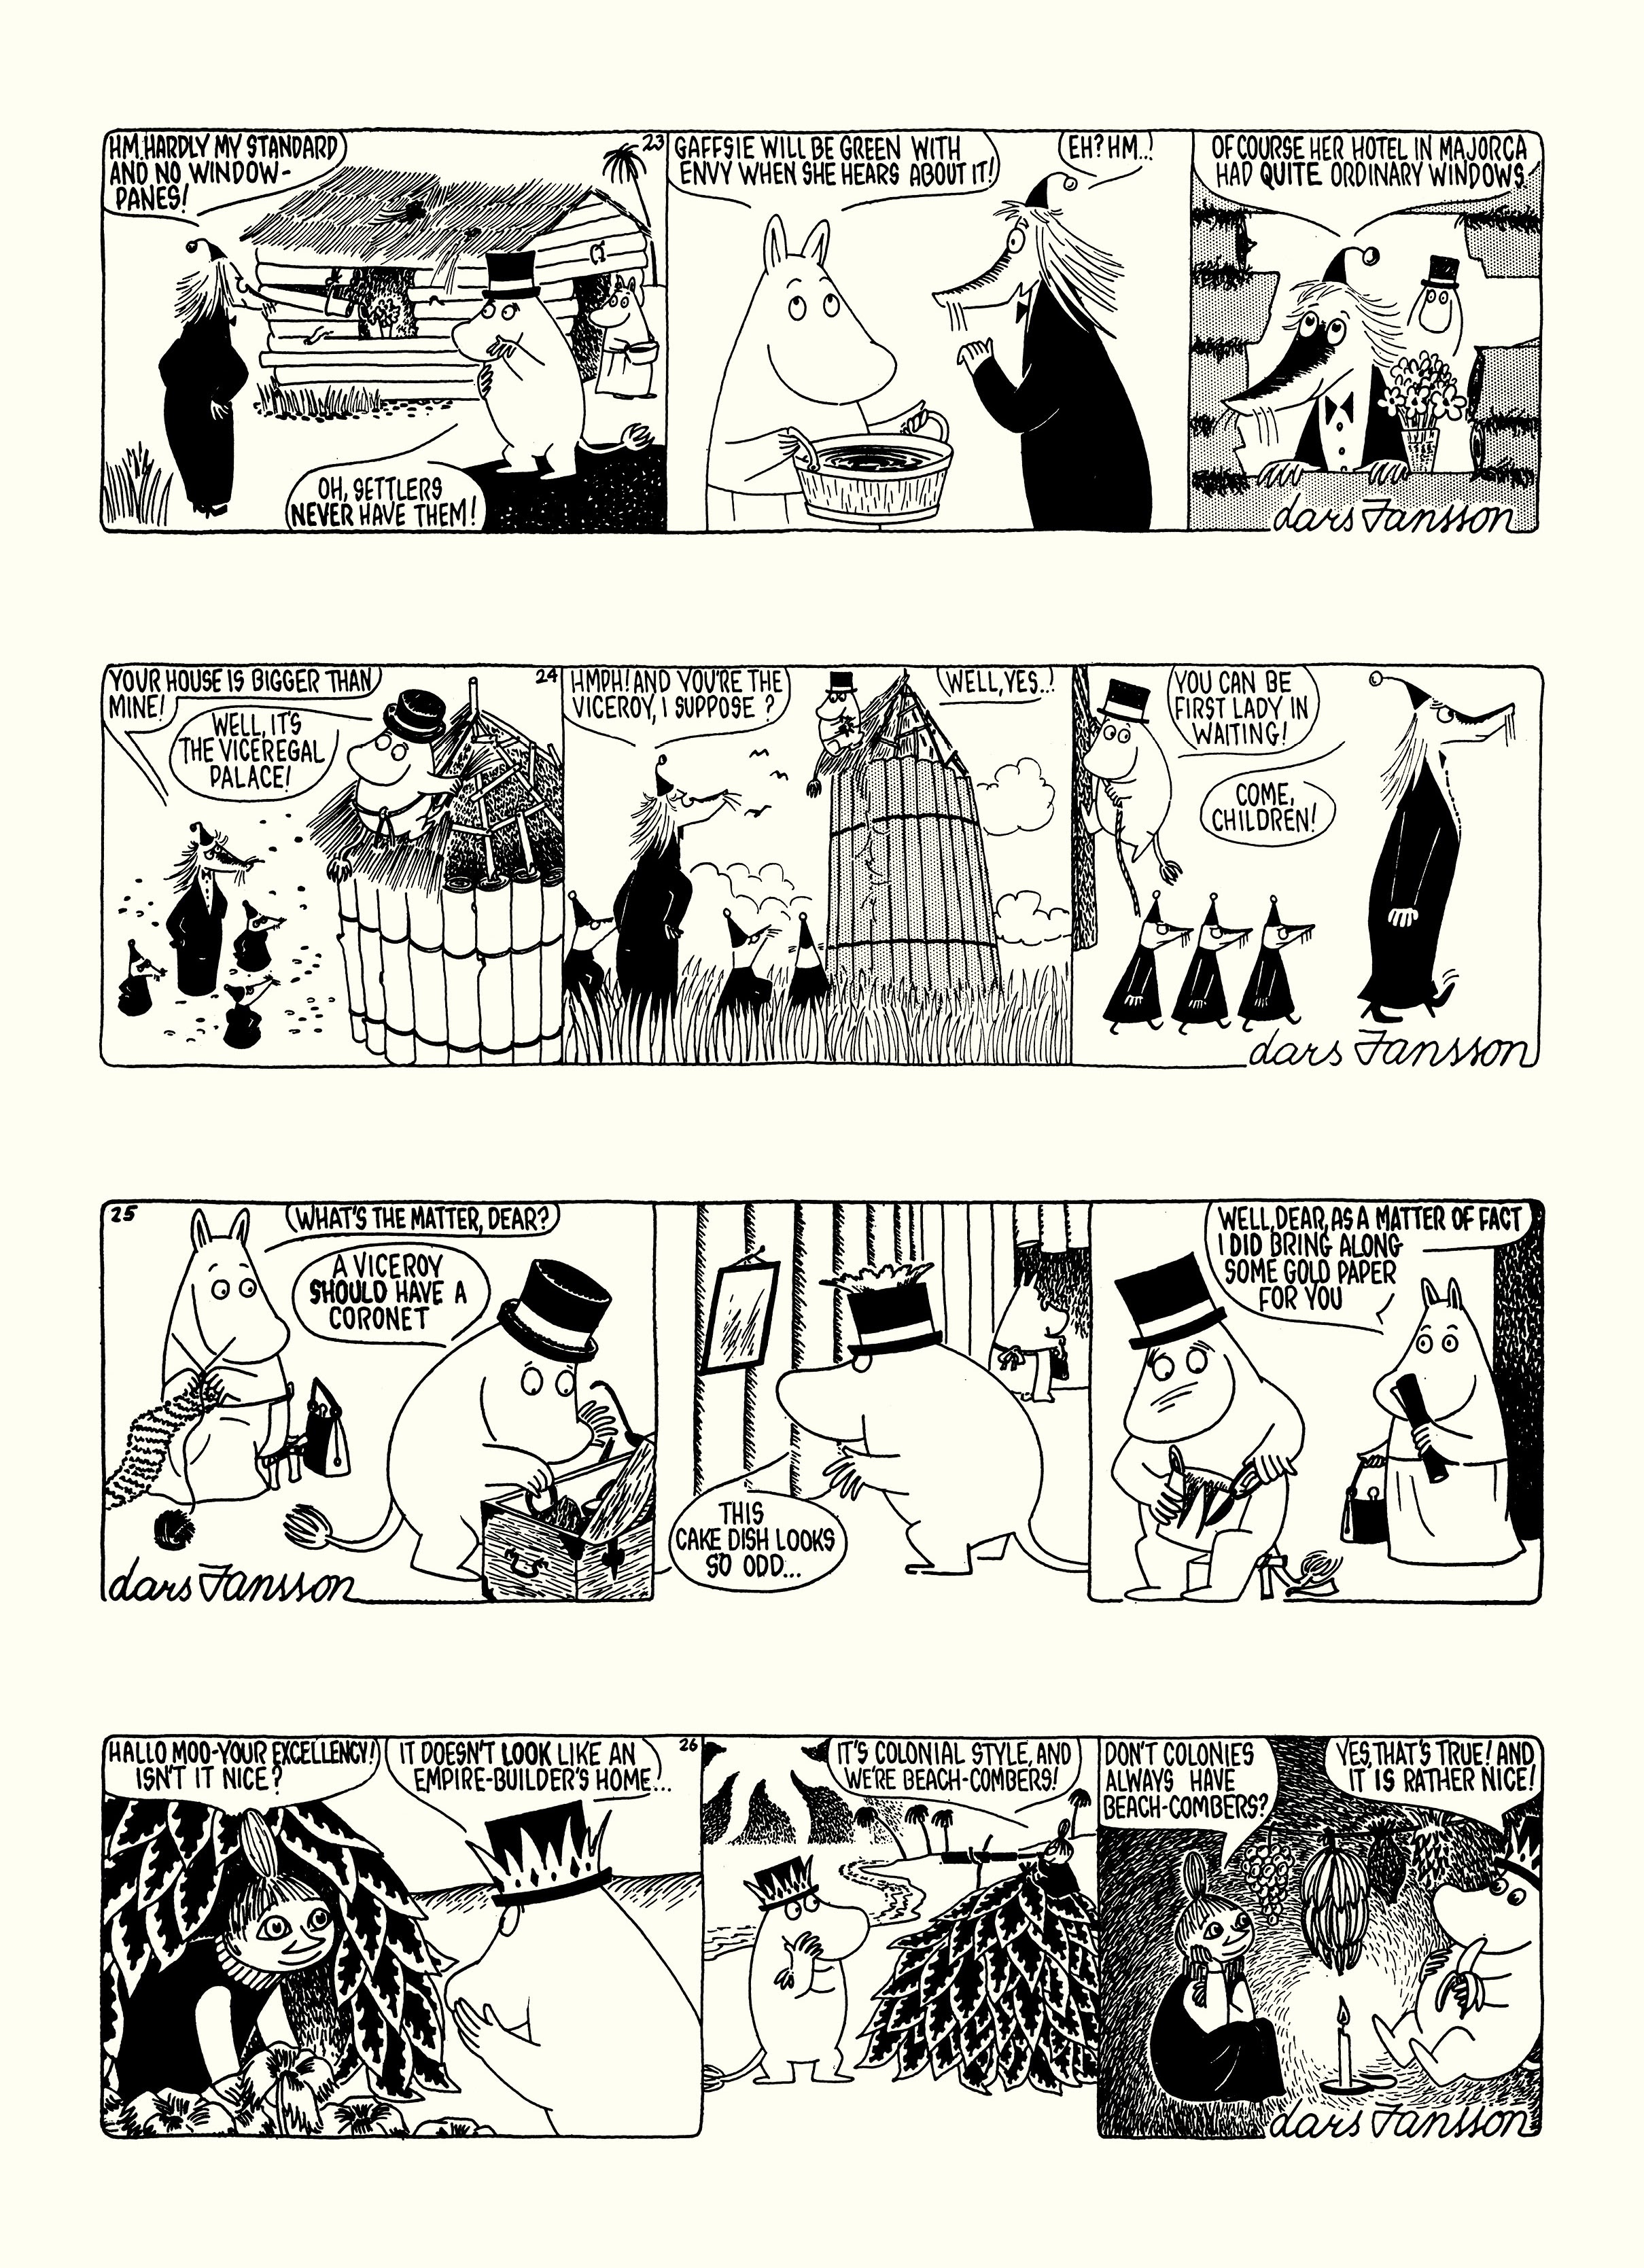 Read online Moomin: The Complete Lars Jansson Comic Strip comic -  Issue # TPB 7 - 12